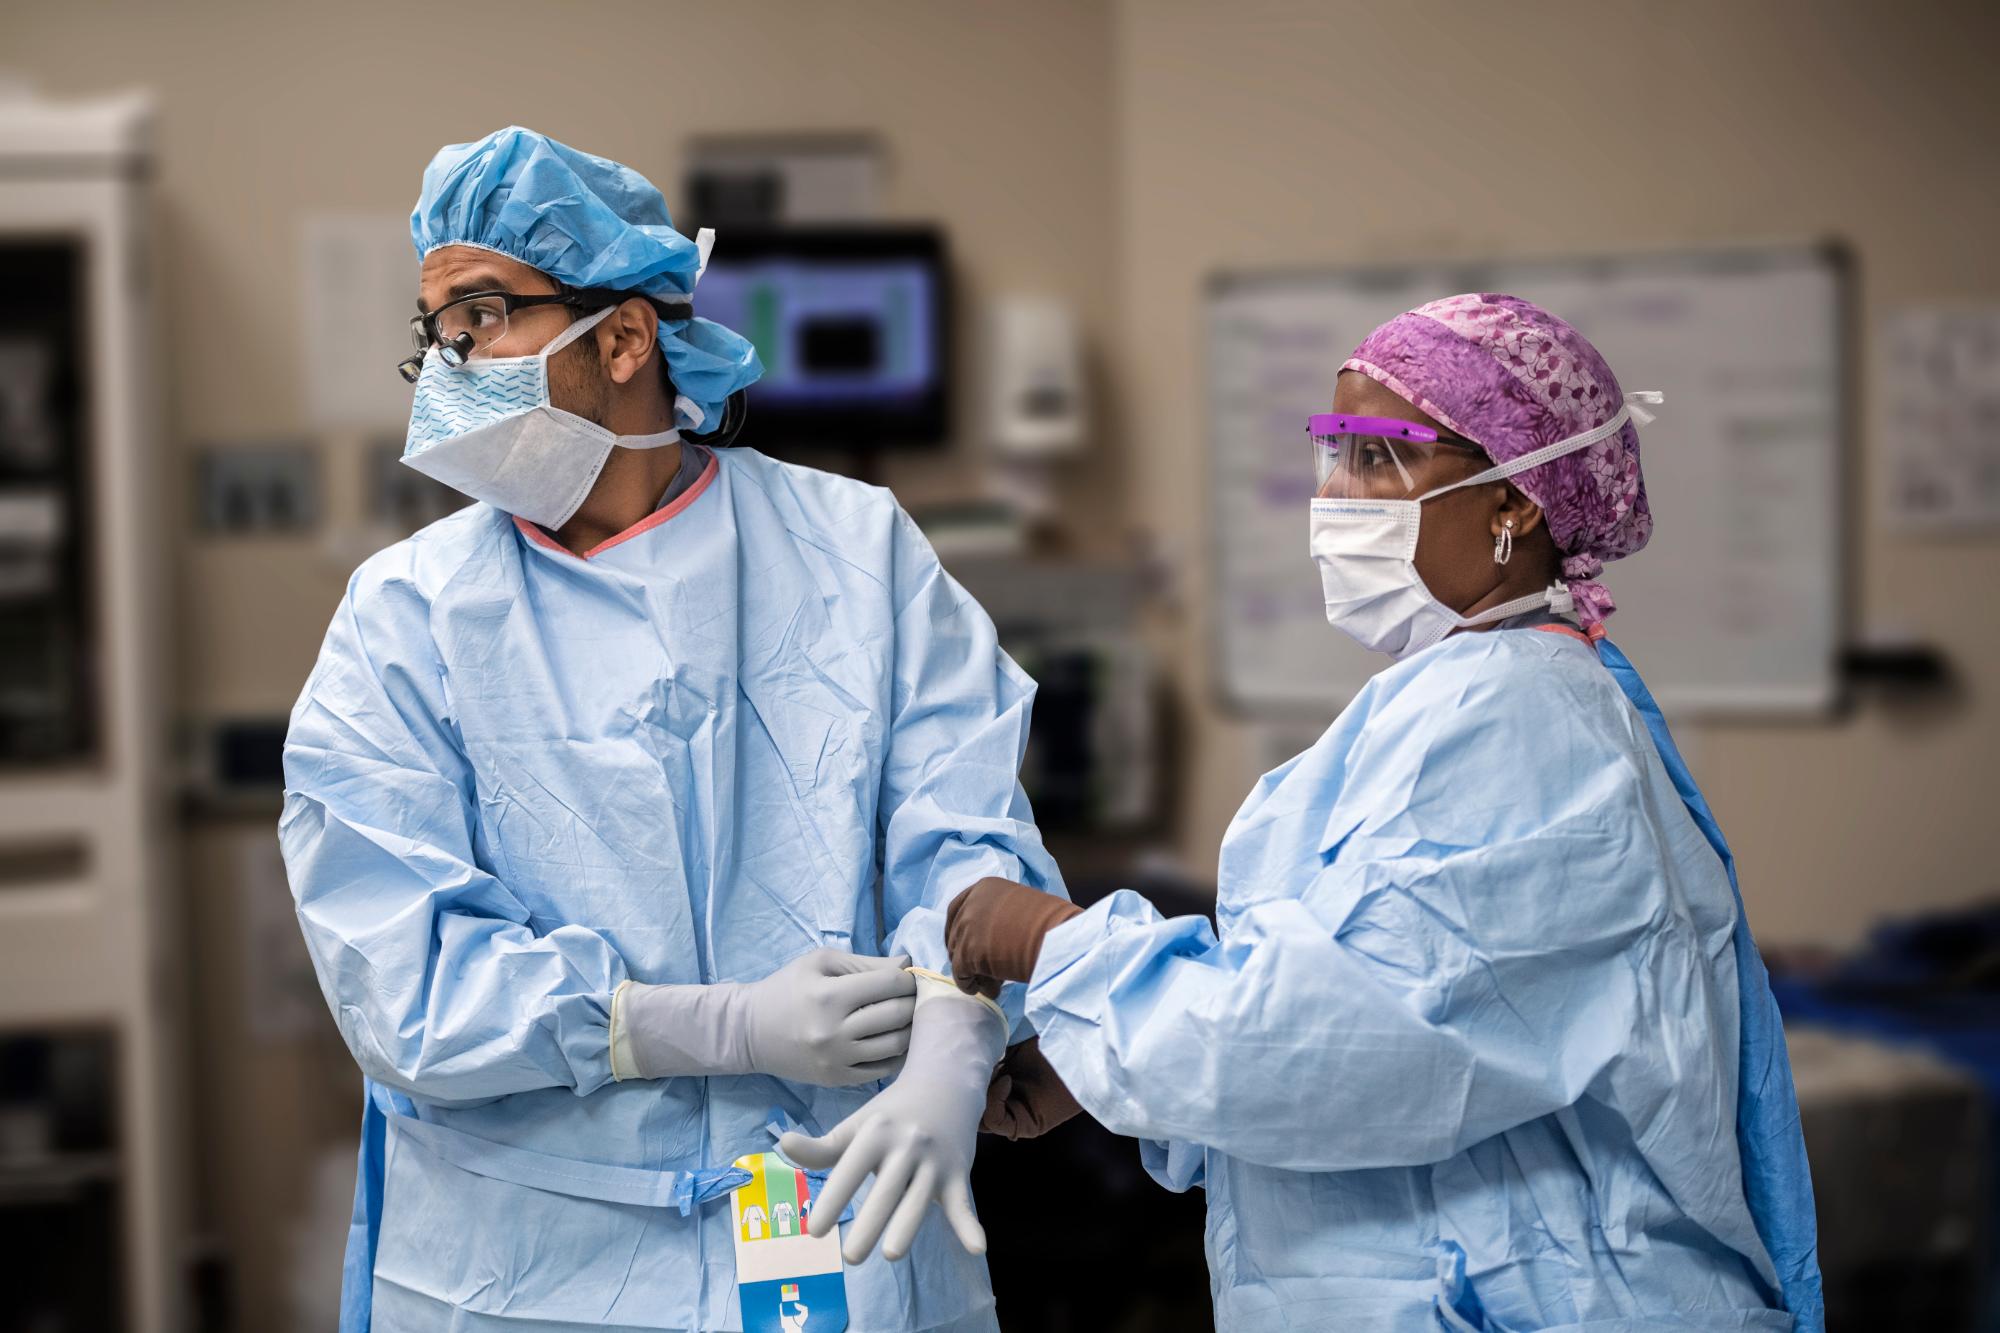 Two surgeons in scrubs preparing for surgery